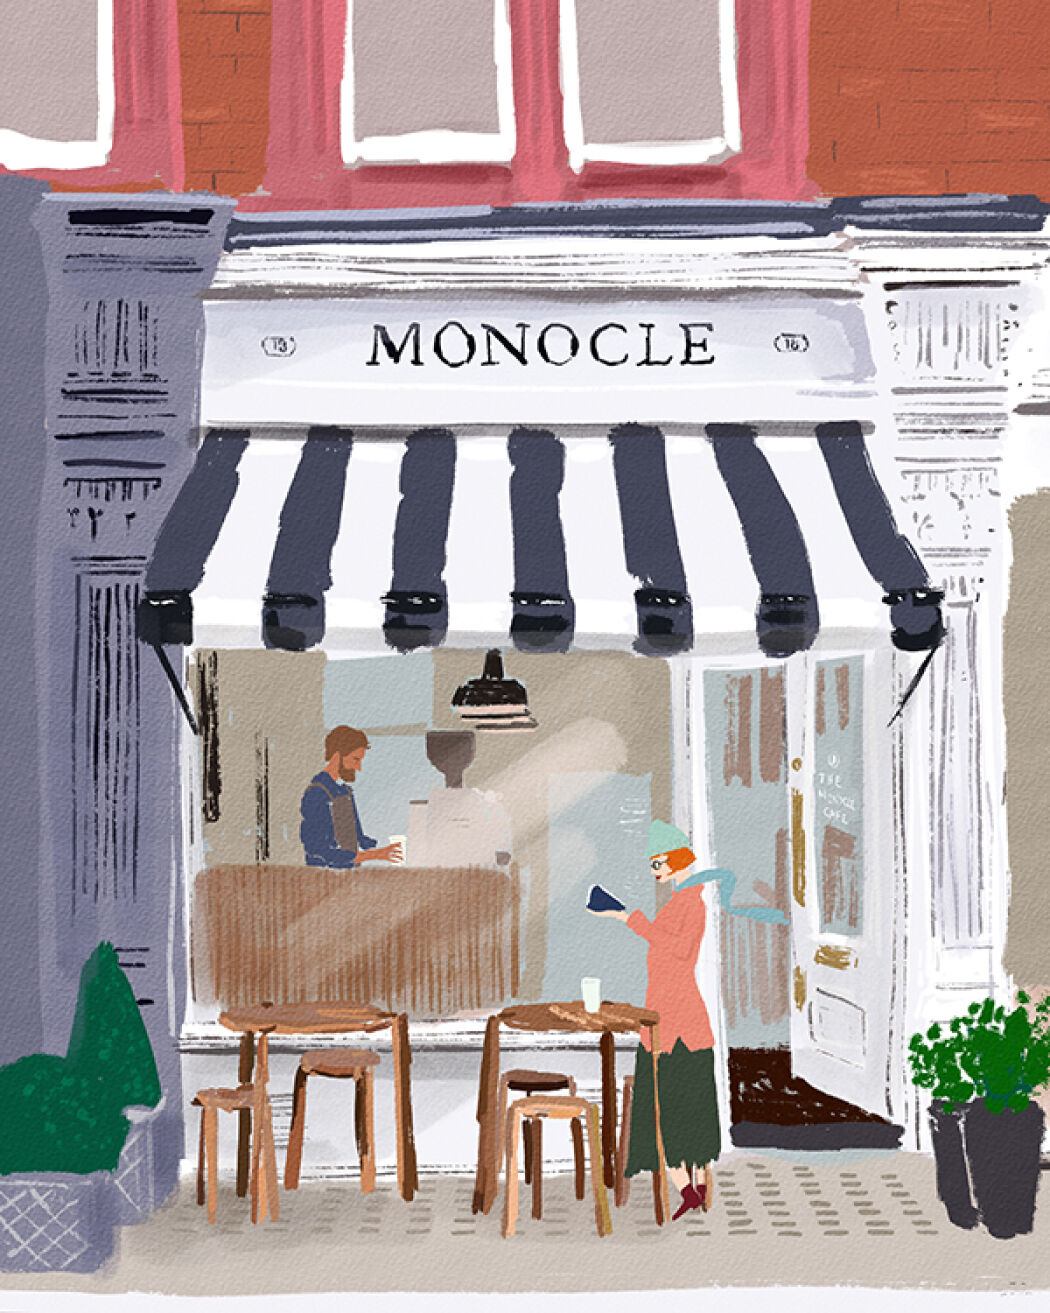 Illustrated architecture and design by Christina Gliha for Monocle Café